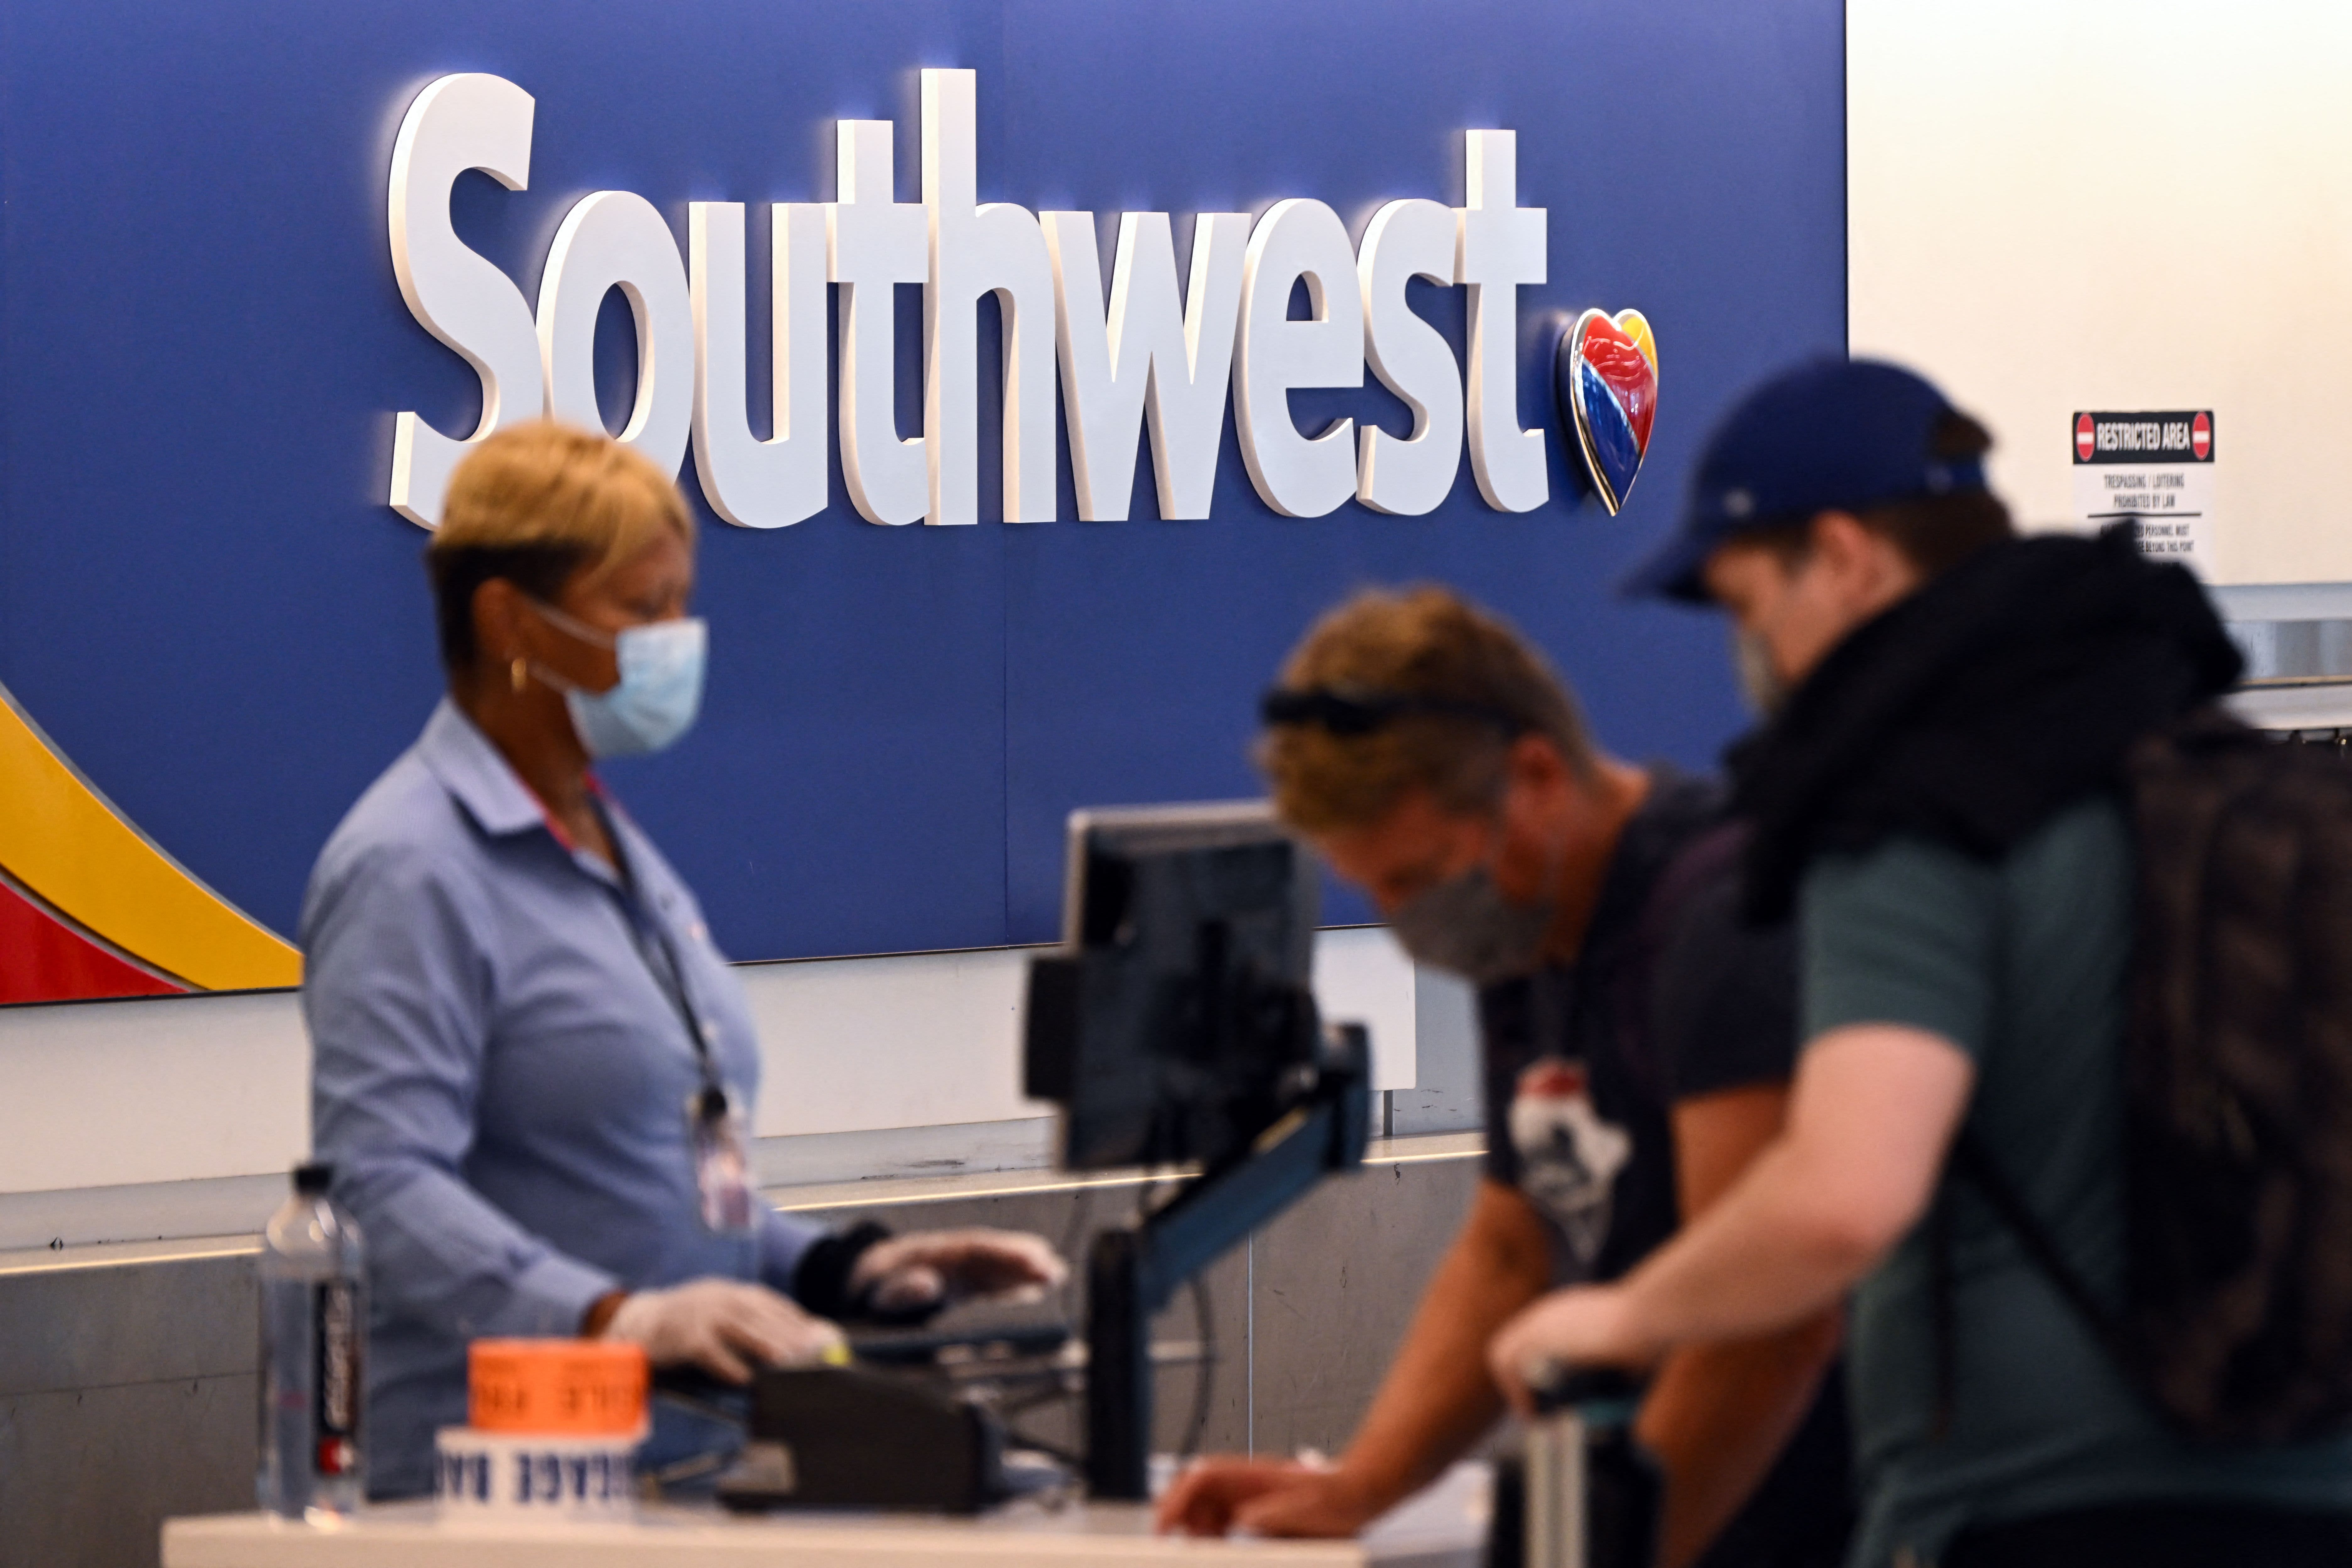 Southwest Airlines remains a strong buy for travelers despite the recent turmoil, according to CFRA